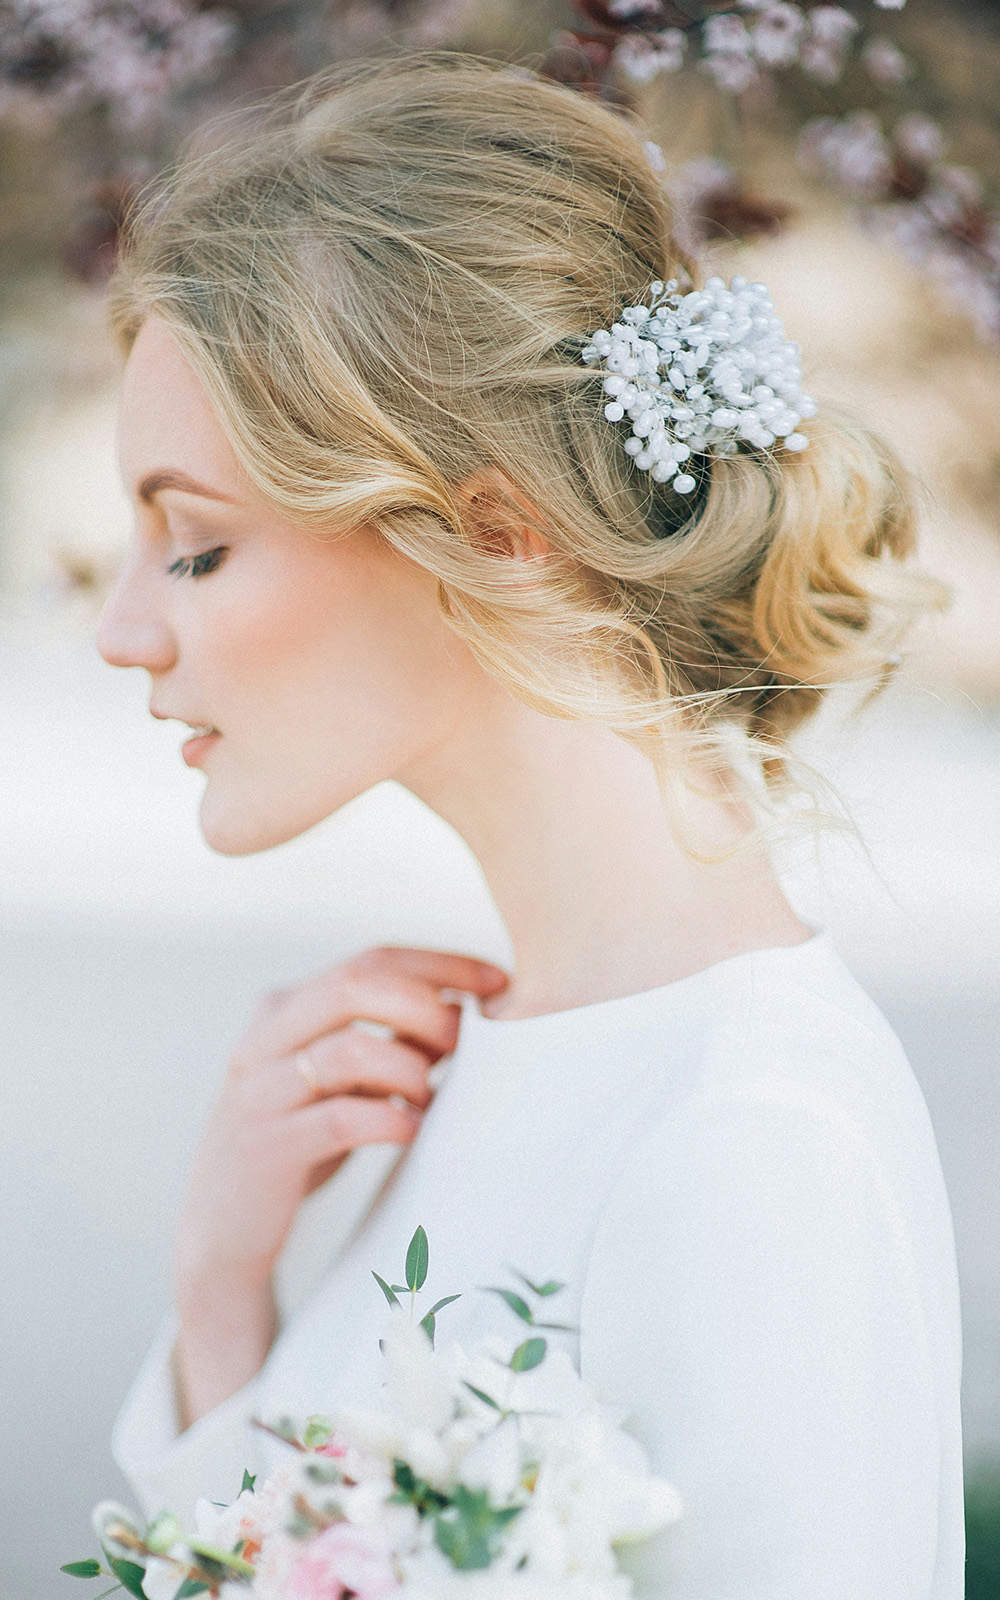 Wedding Guest Hairstyle Trends You Surely Must Follow – Kerotin